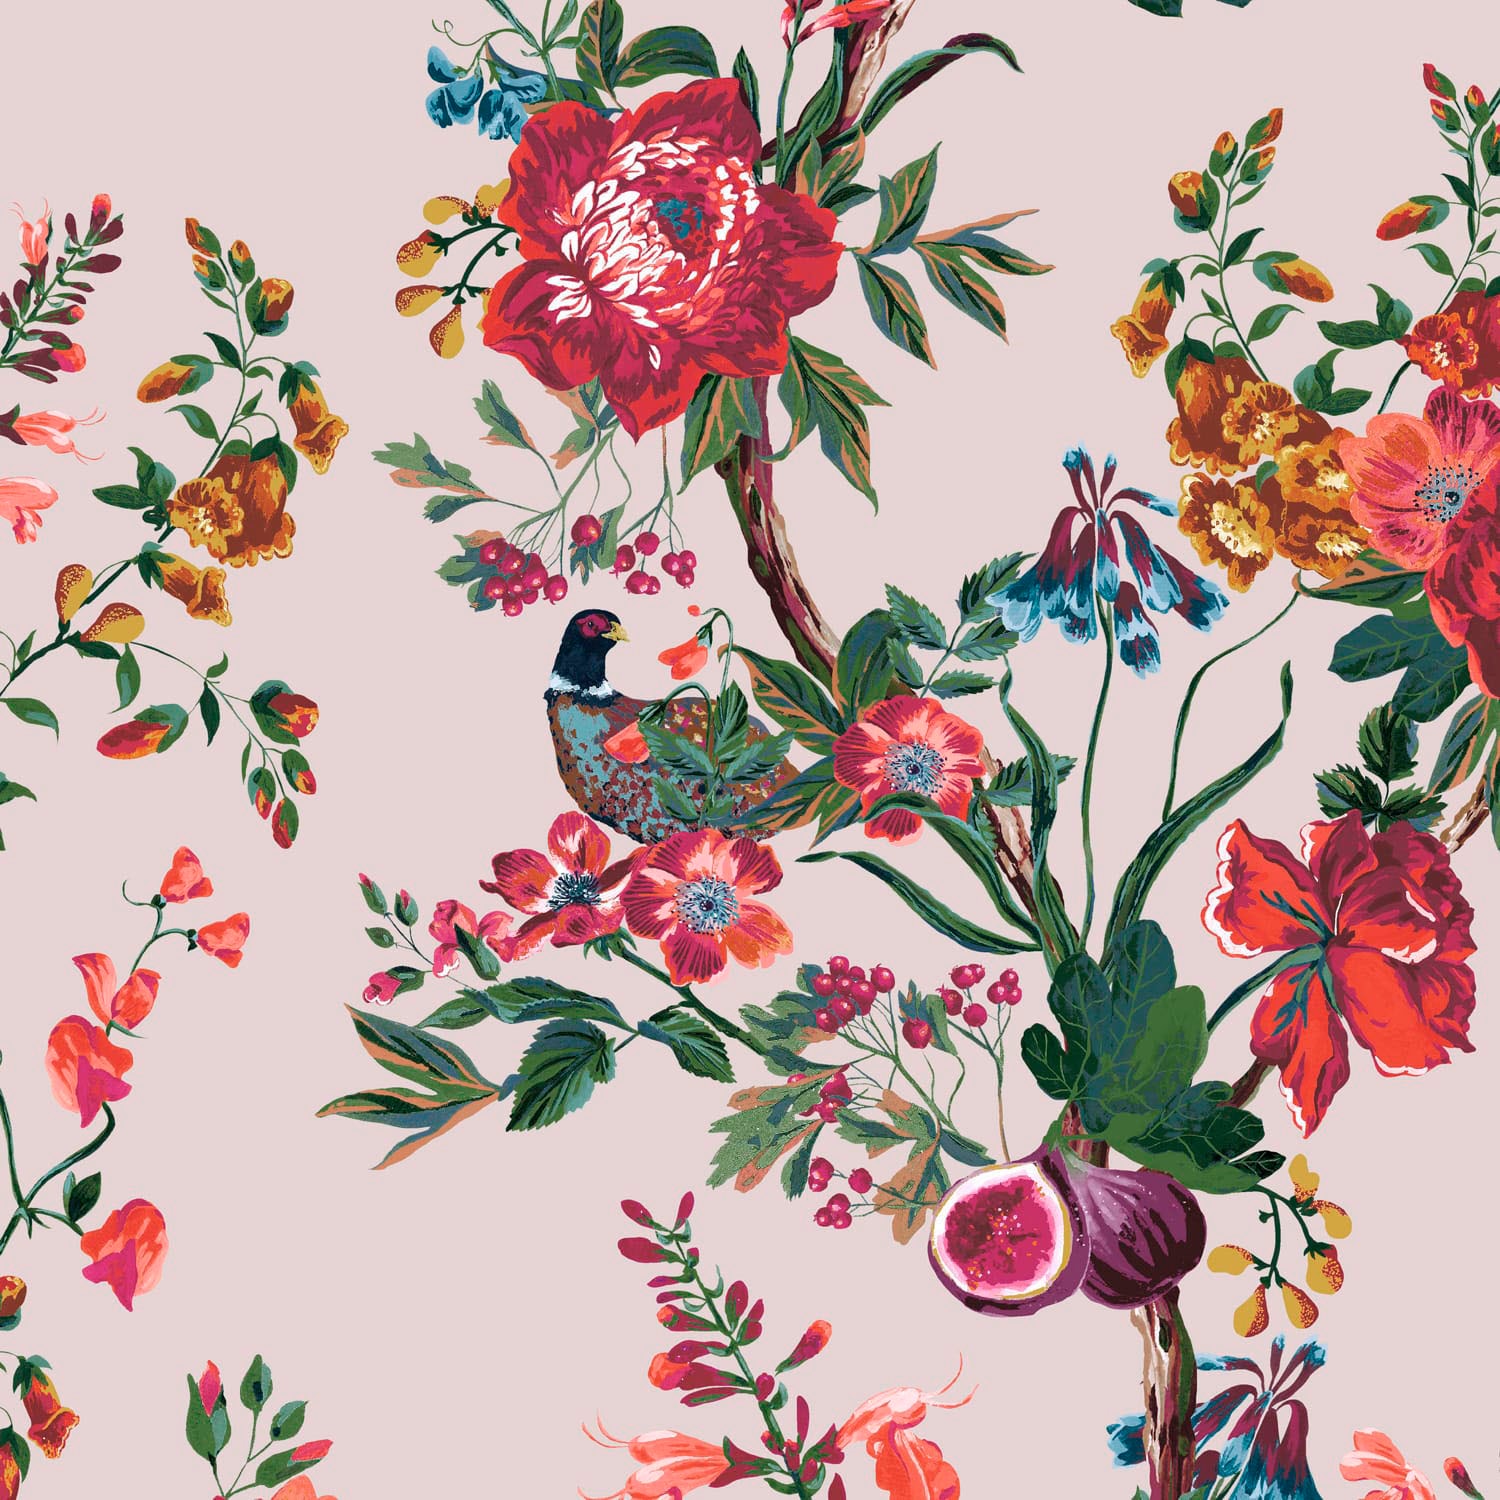 Vliestapete »Forest Chinoiserie«, floral, floral